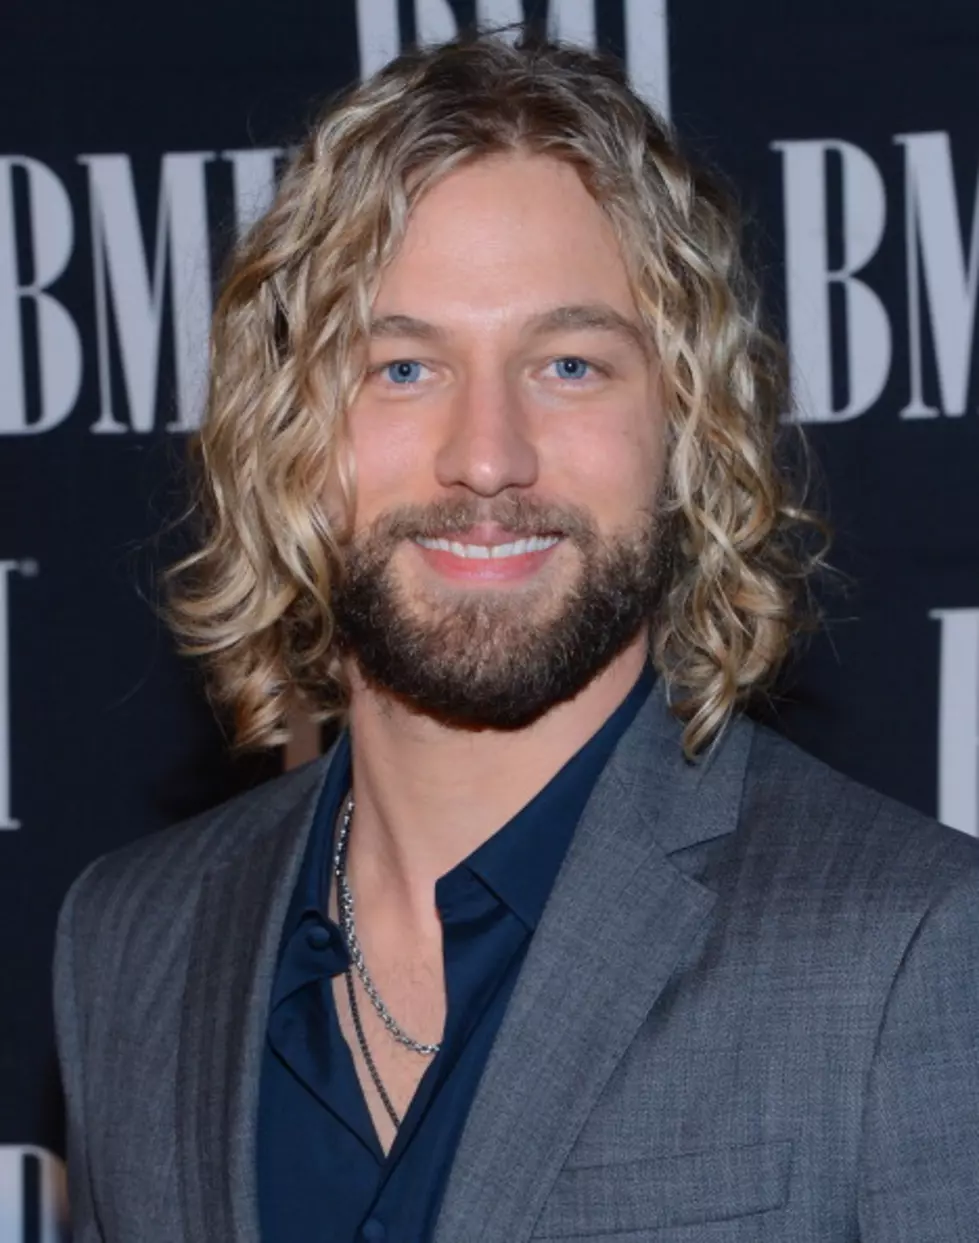 Singer Casey James Talks About Why He Loves Halloween So Much… The Candy!